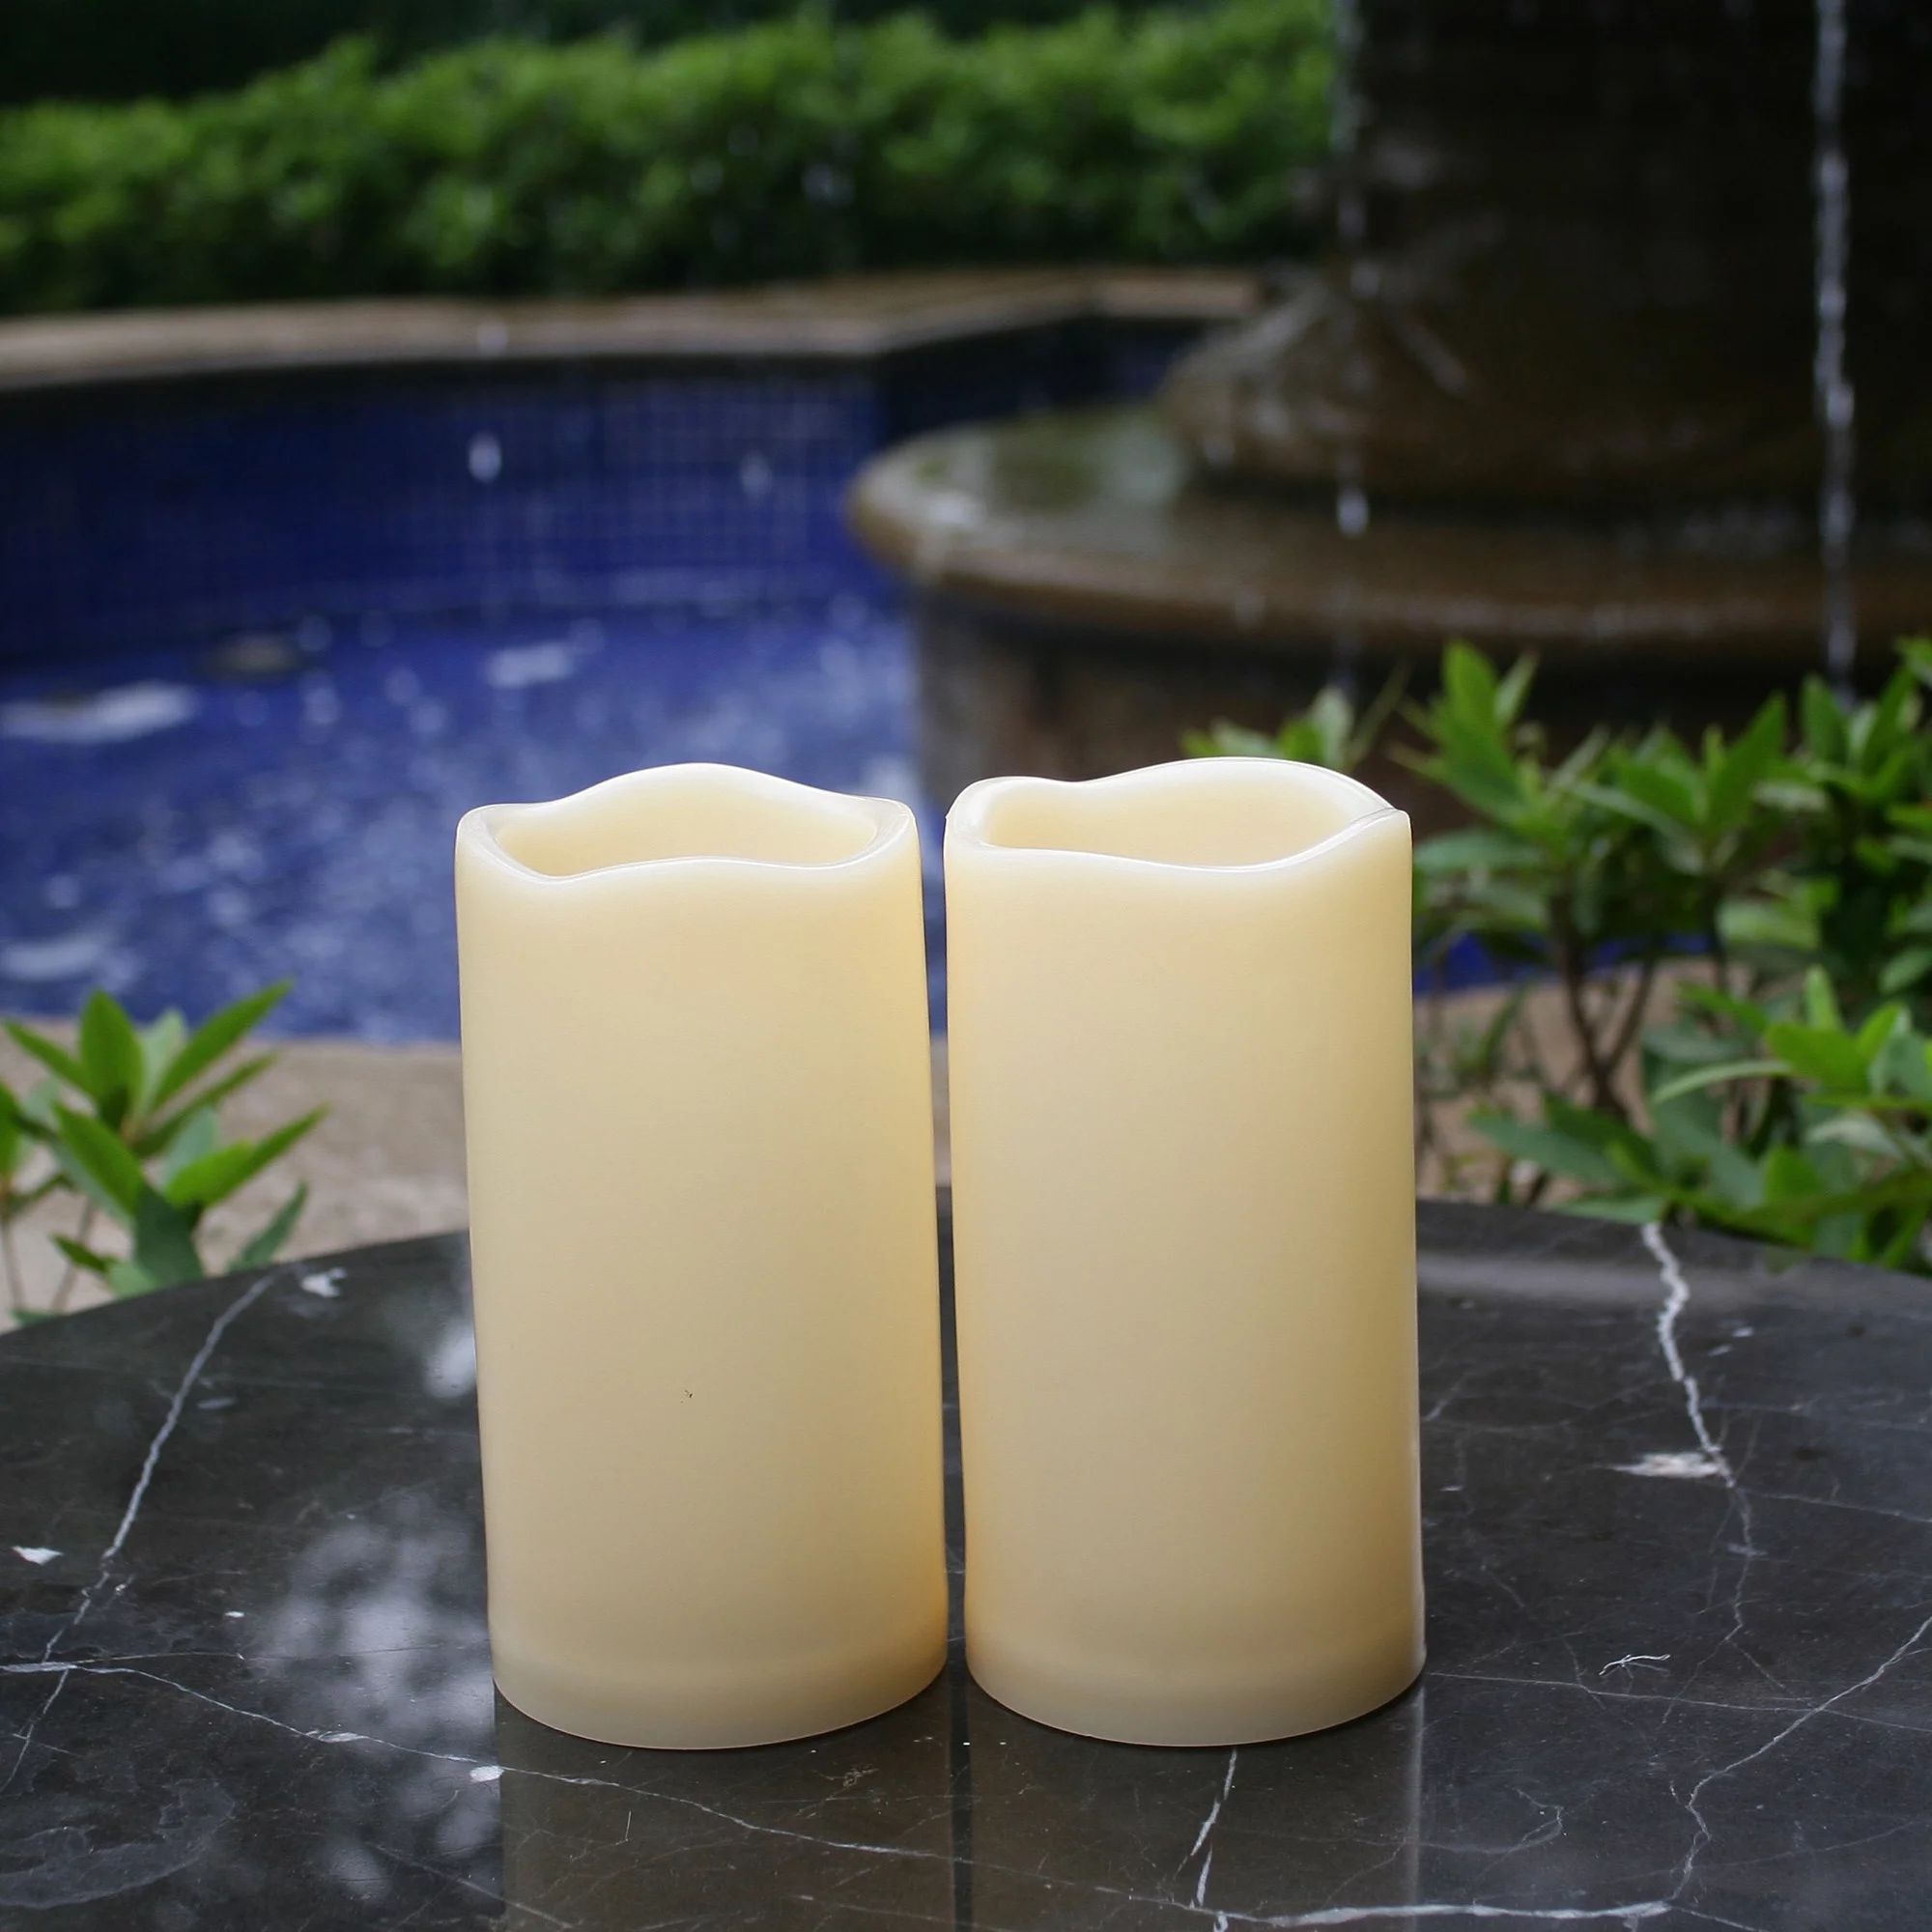 Outdoor Indoor Flameless LED Battery Operated Pillar Candles with Timer 3"(D)x6"(H) 2 Pack | Walmart (US)